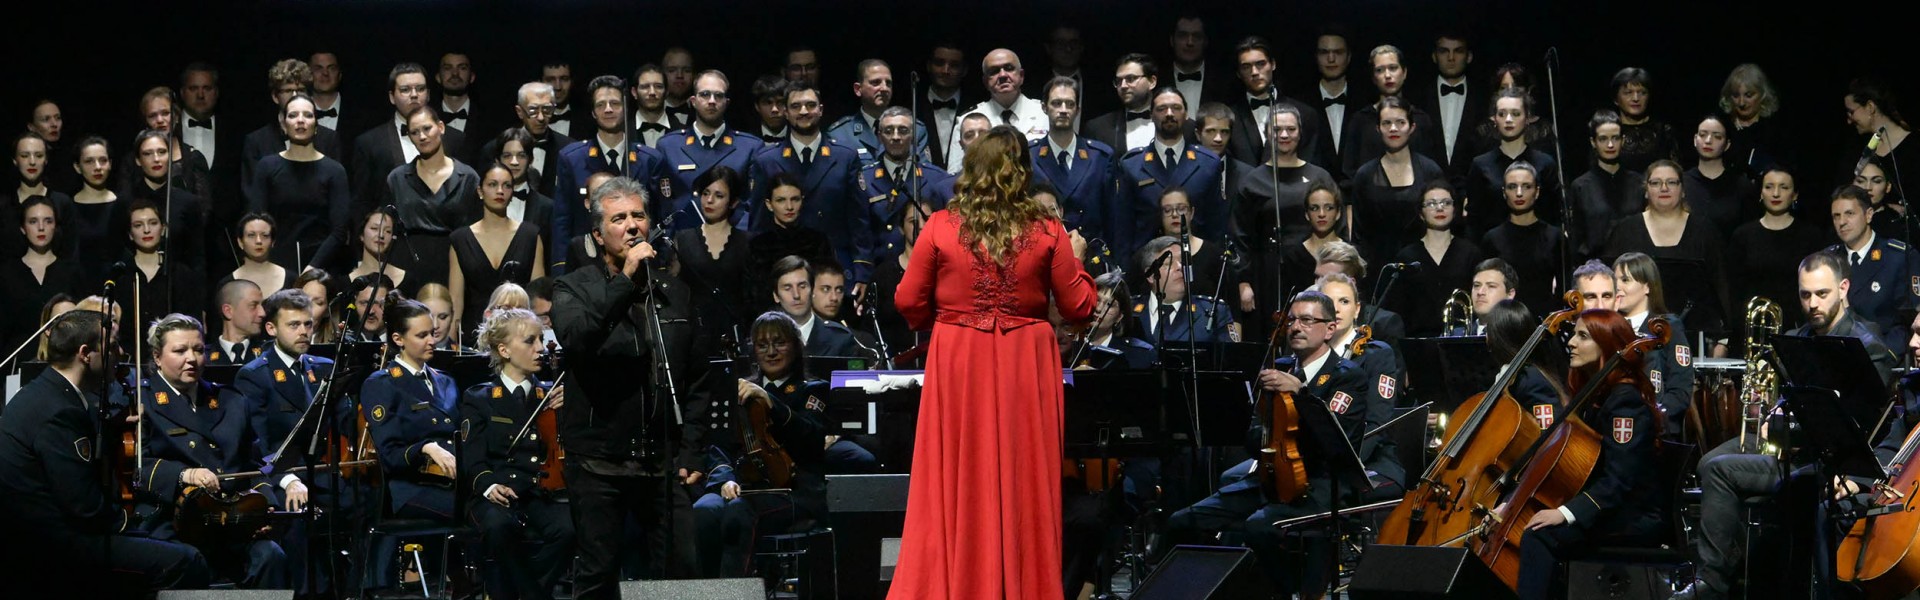 gala-concert-to-mark-serbian-armed-forces-day